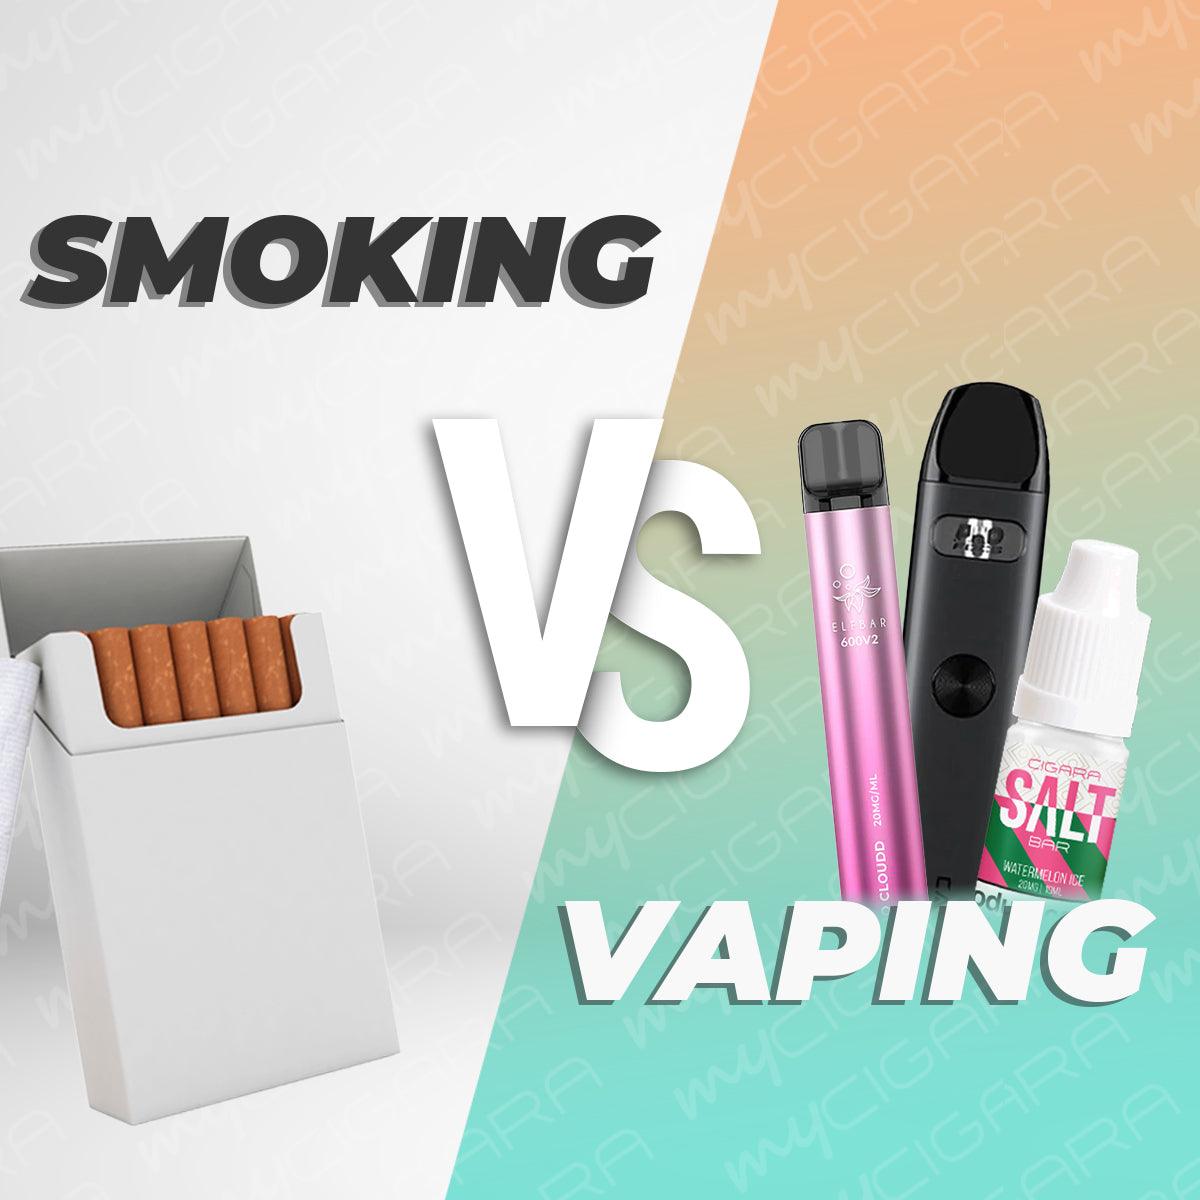 Smoking Vs Vaping: What’s The Difference?